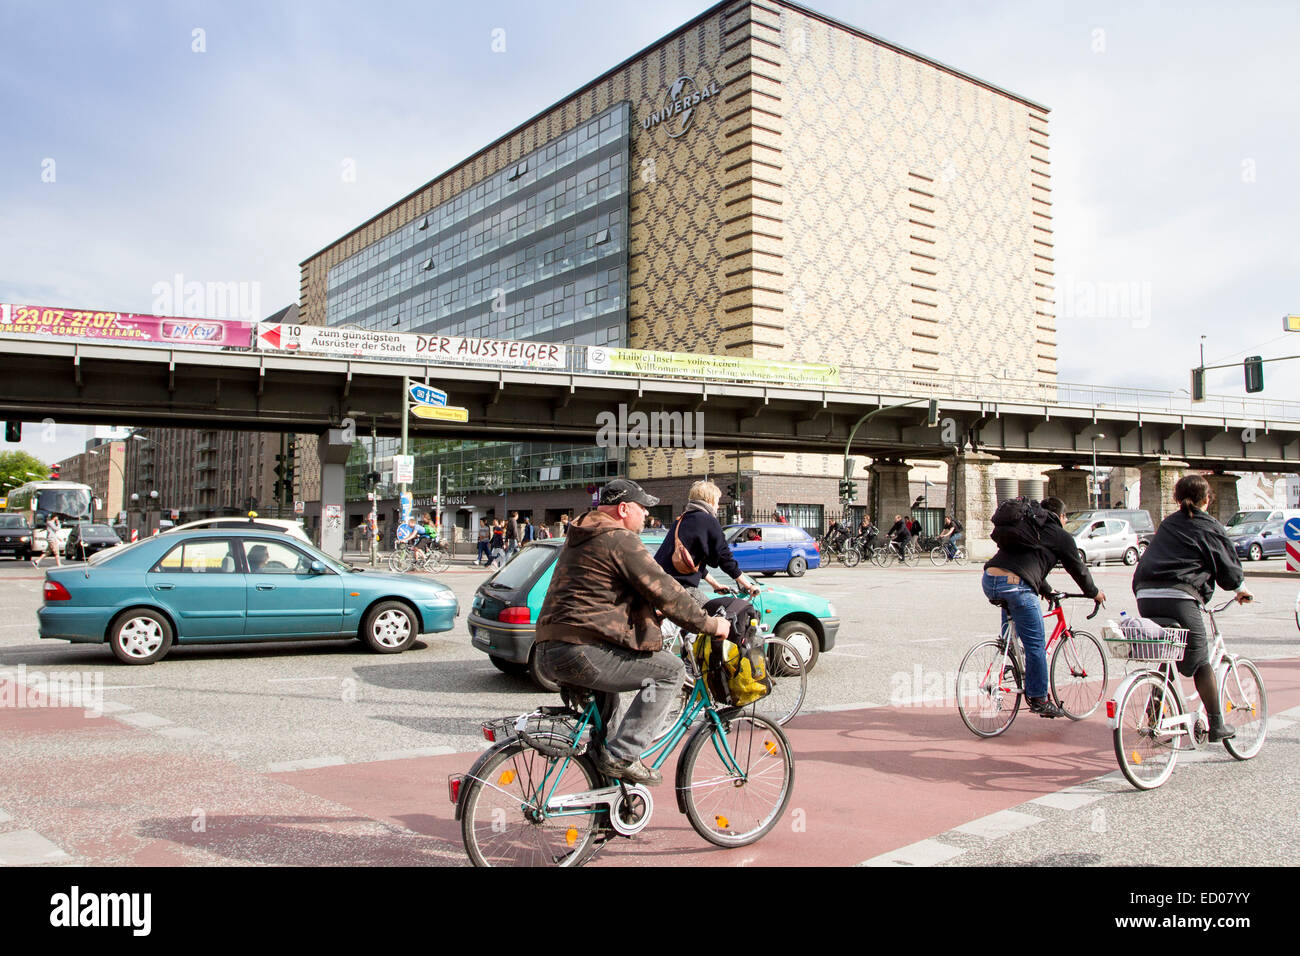 People riding a bike in Warschauer strasse, in front of Universal Studies, Berlin, Germany Stock Photo